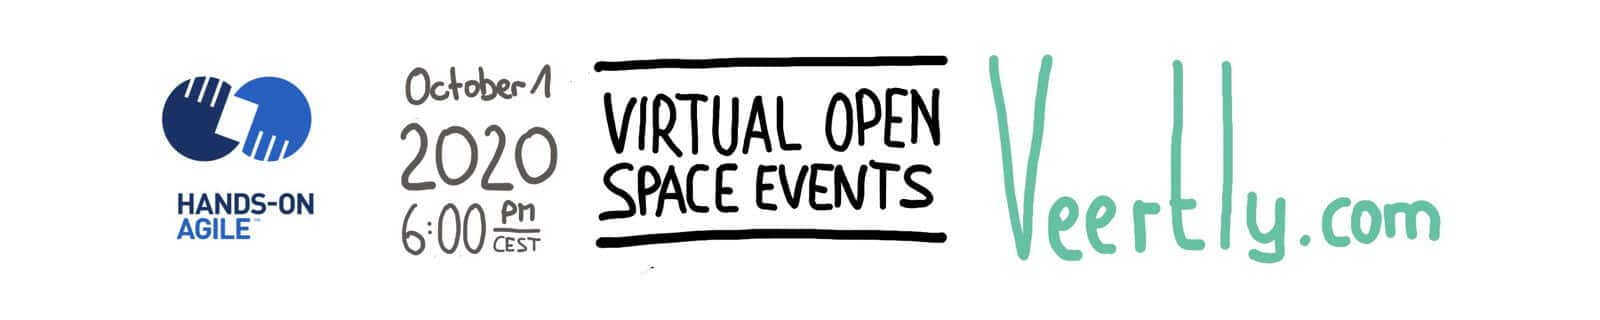 🖥 Hands-on Agile #27: Virtual Open Space Events w/ Veertly